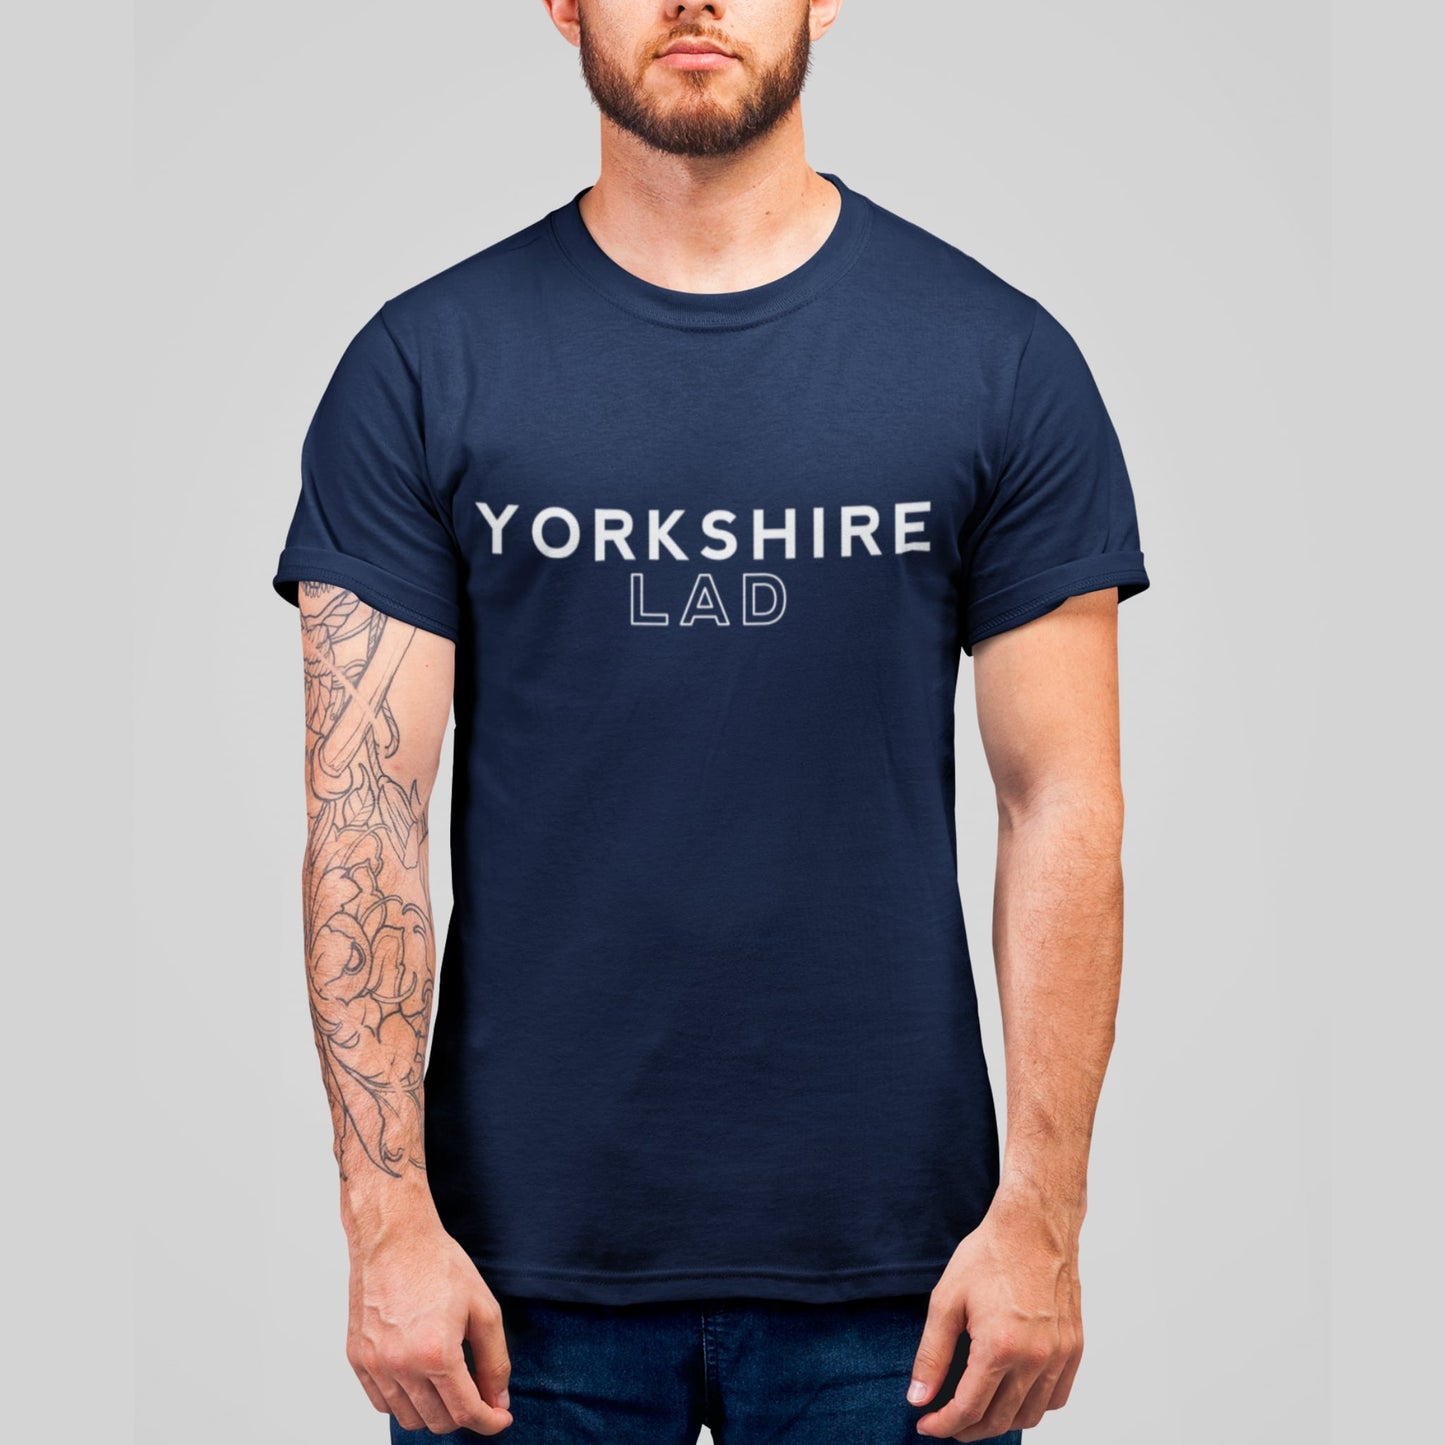 Yorkshire Lad T-Shirt - The Great Yorkshire Shop